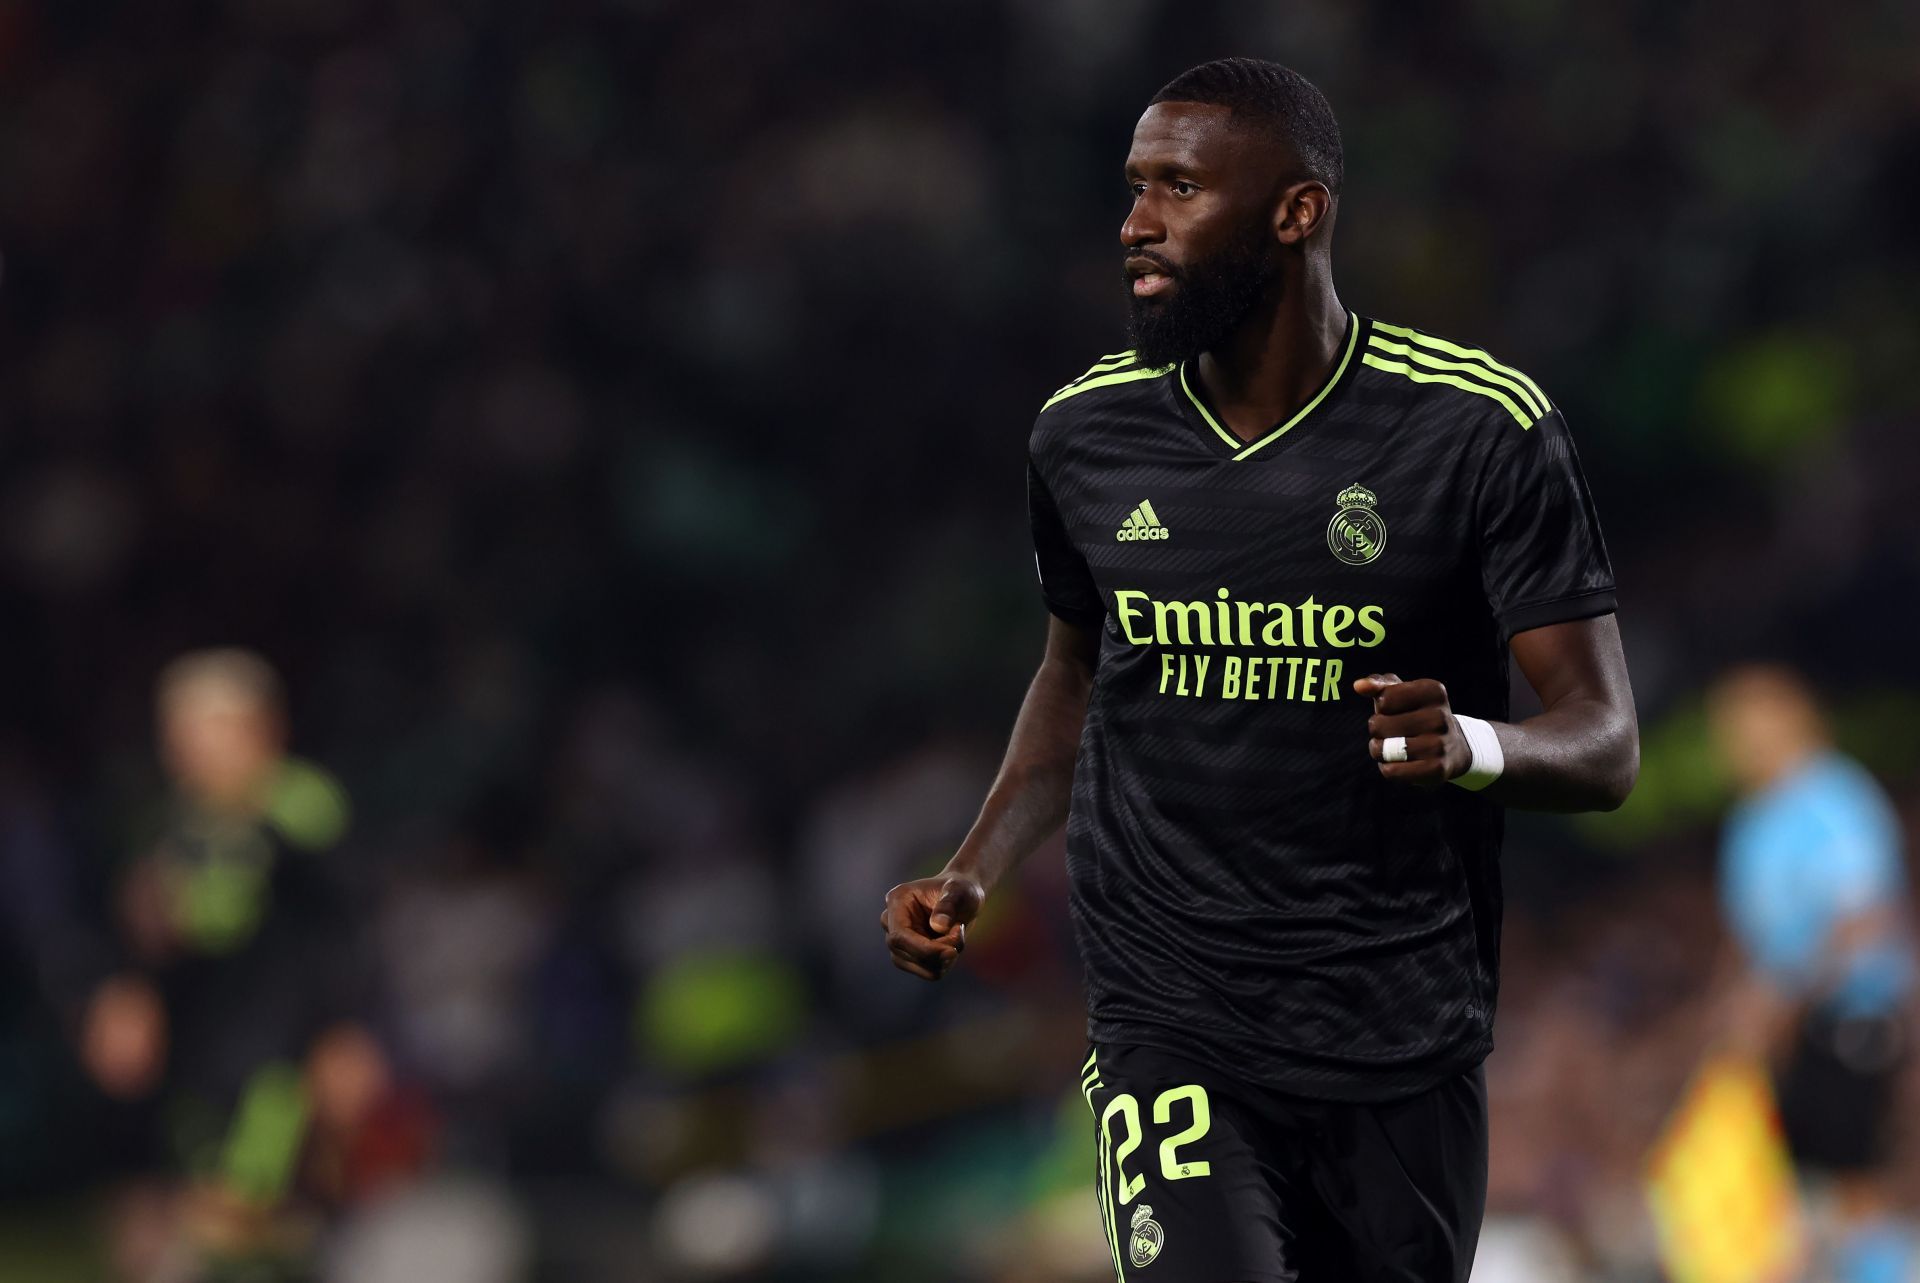 Antonio Rudiger joined Real Madrid on a Bosman move this summer.